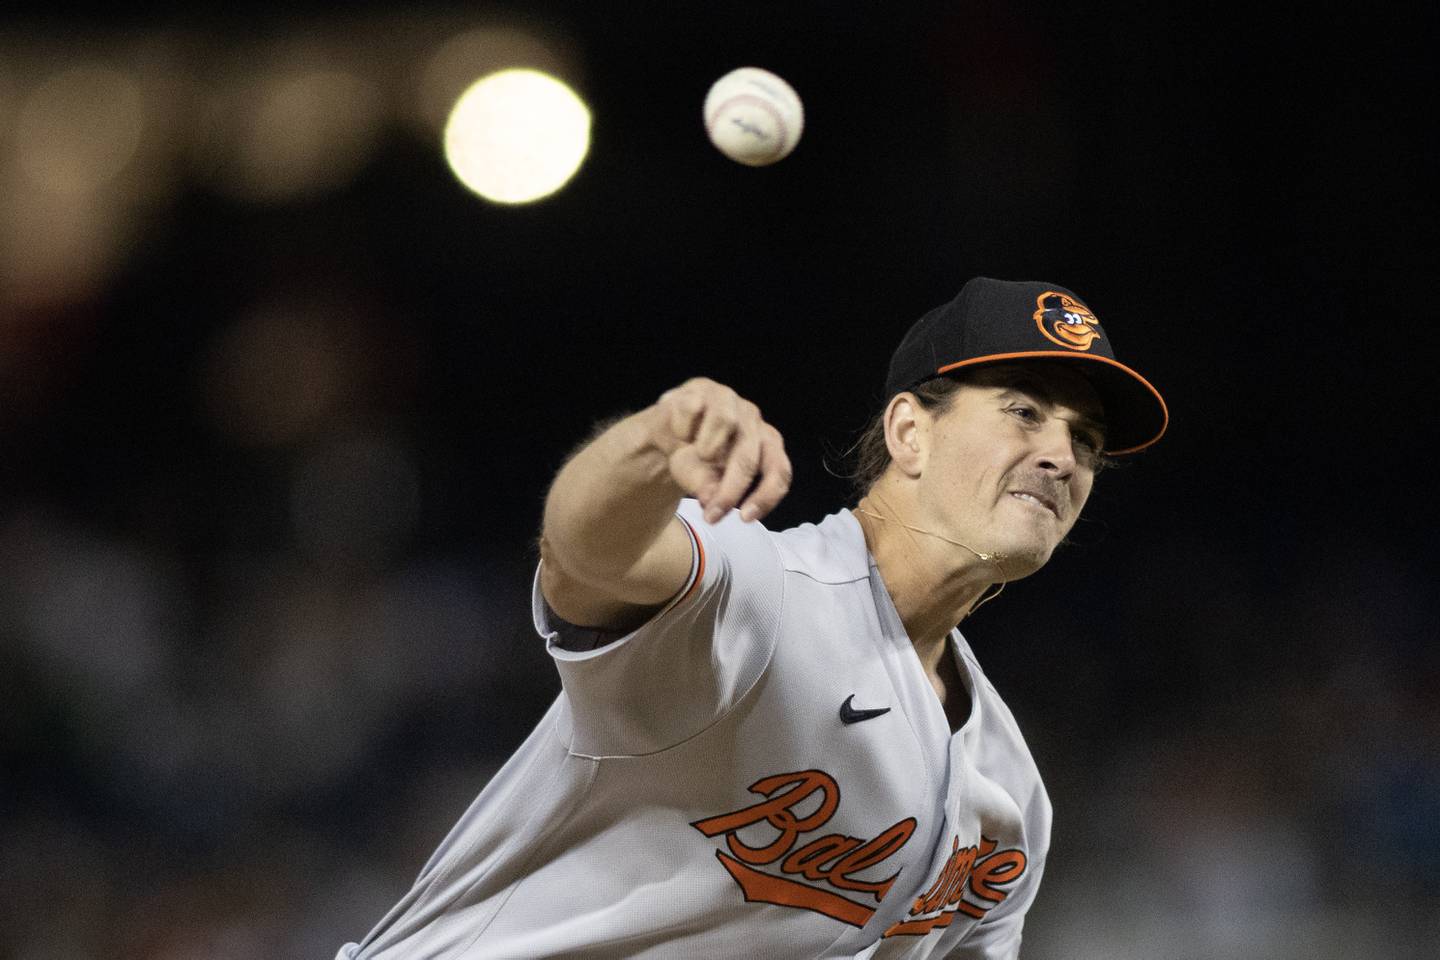 Baltimore Orioles starting pitcher Dean Kremer (64) throws a pitch in the fifth inning during a regular season game at Nationals Park in Washington, D.C., on Tuesday, April 18, 2023.